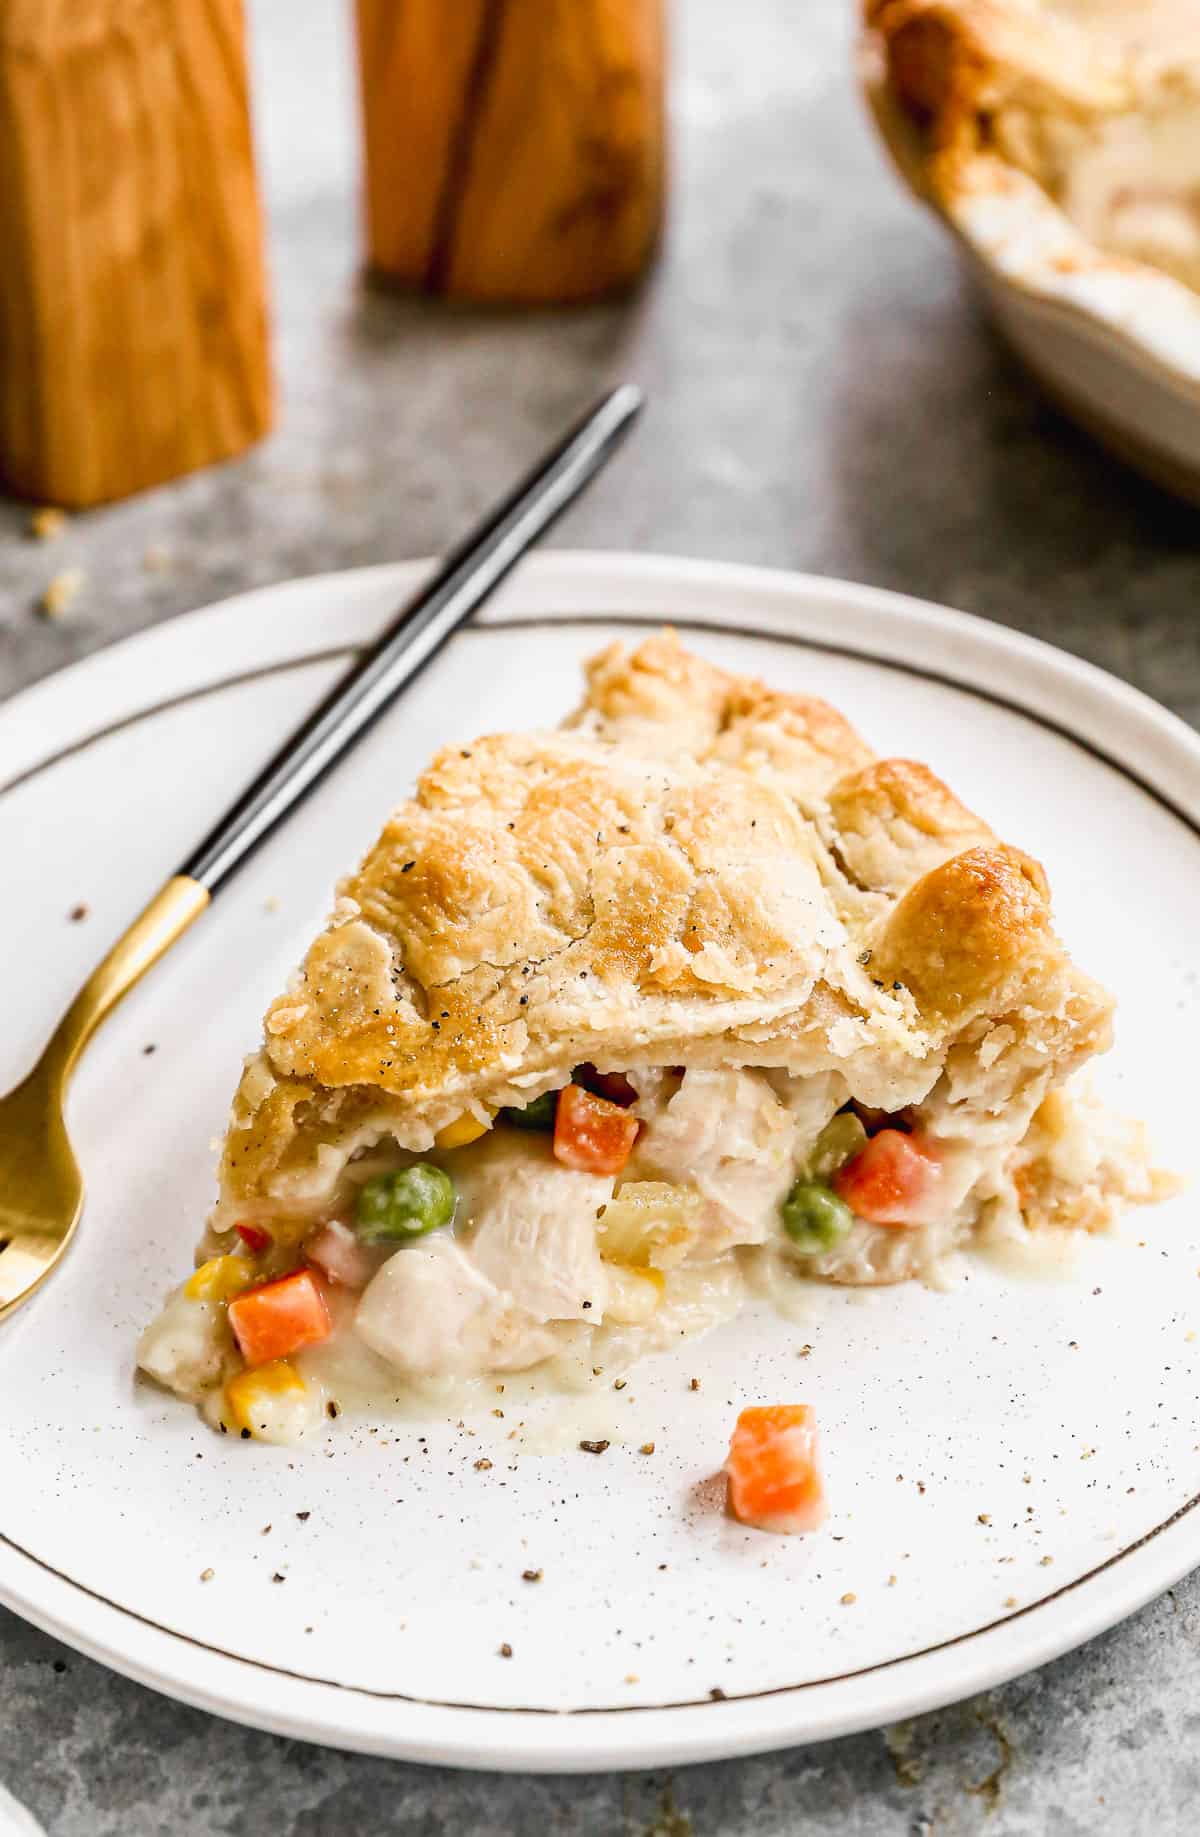 A slice of Chicken Pot Pie on a white plate.